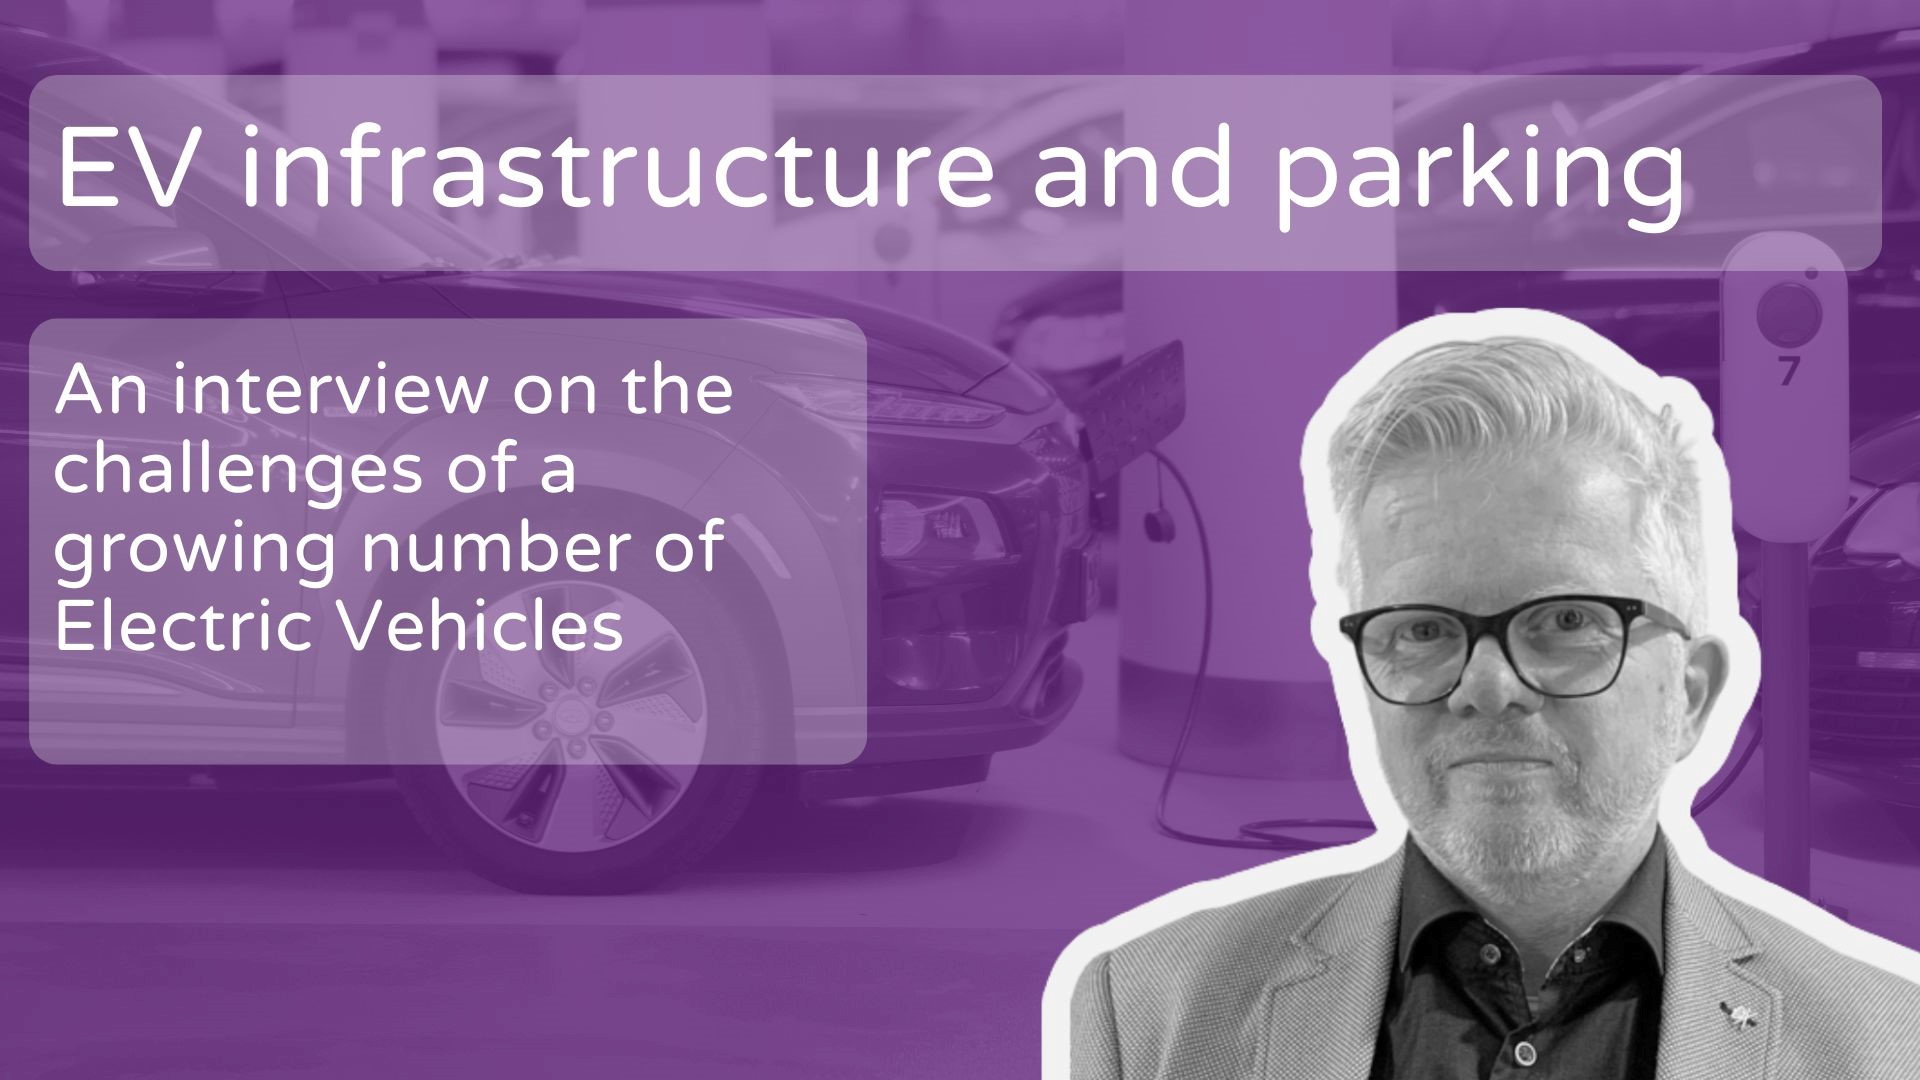 More EVs, More Challenges for Infrastructure and Parking